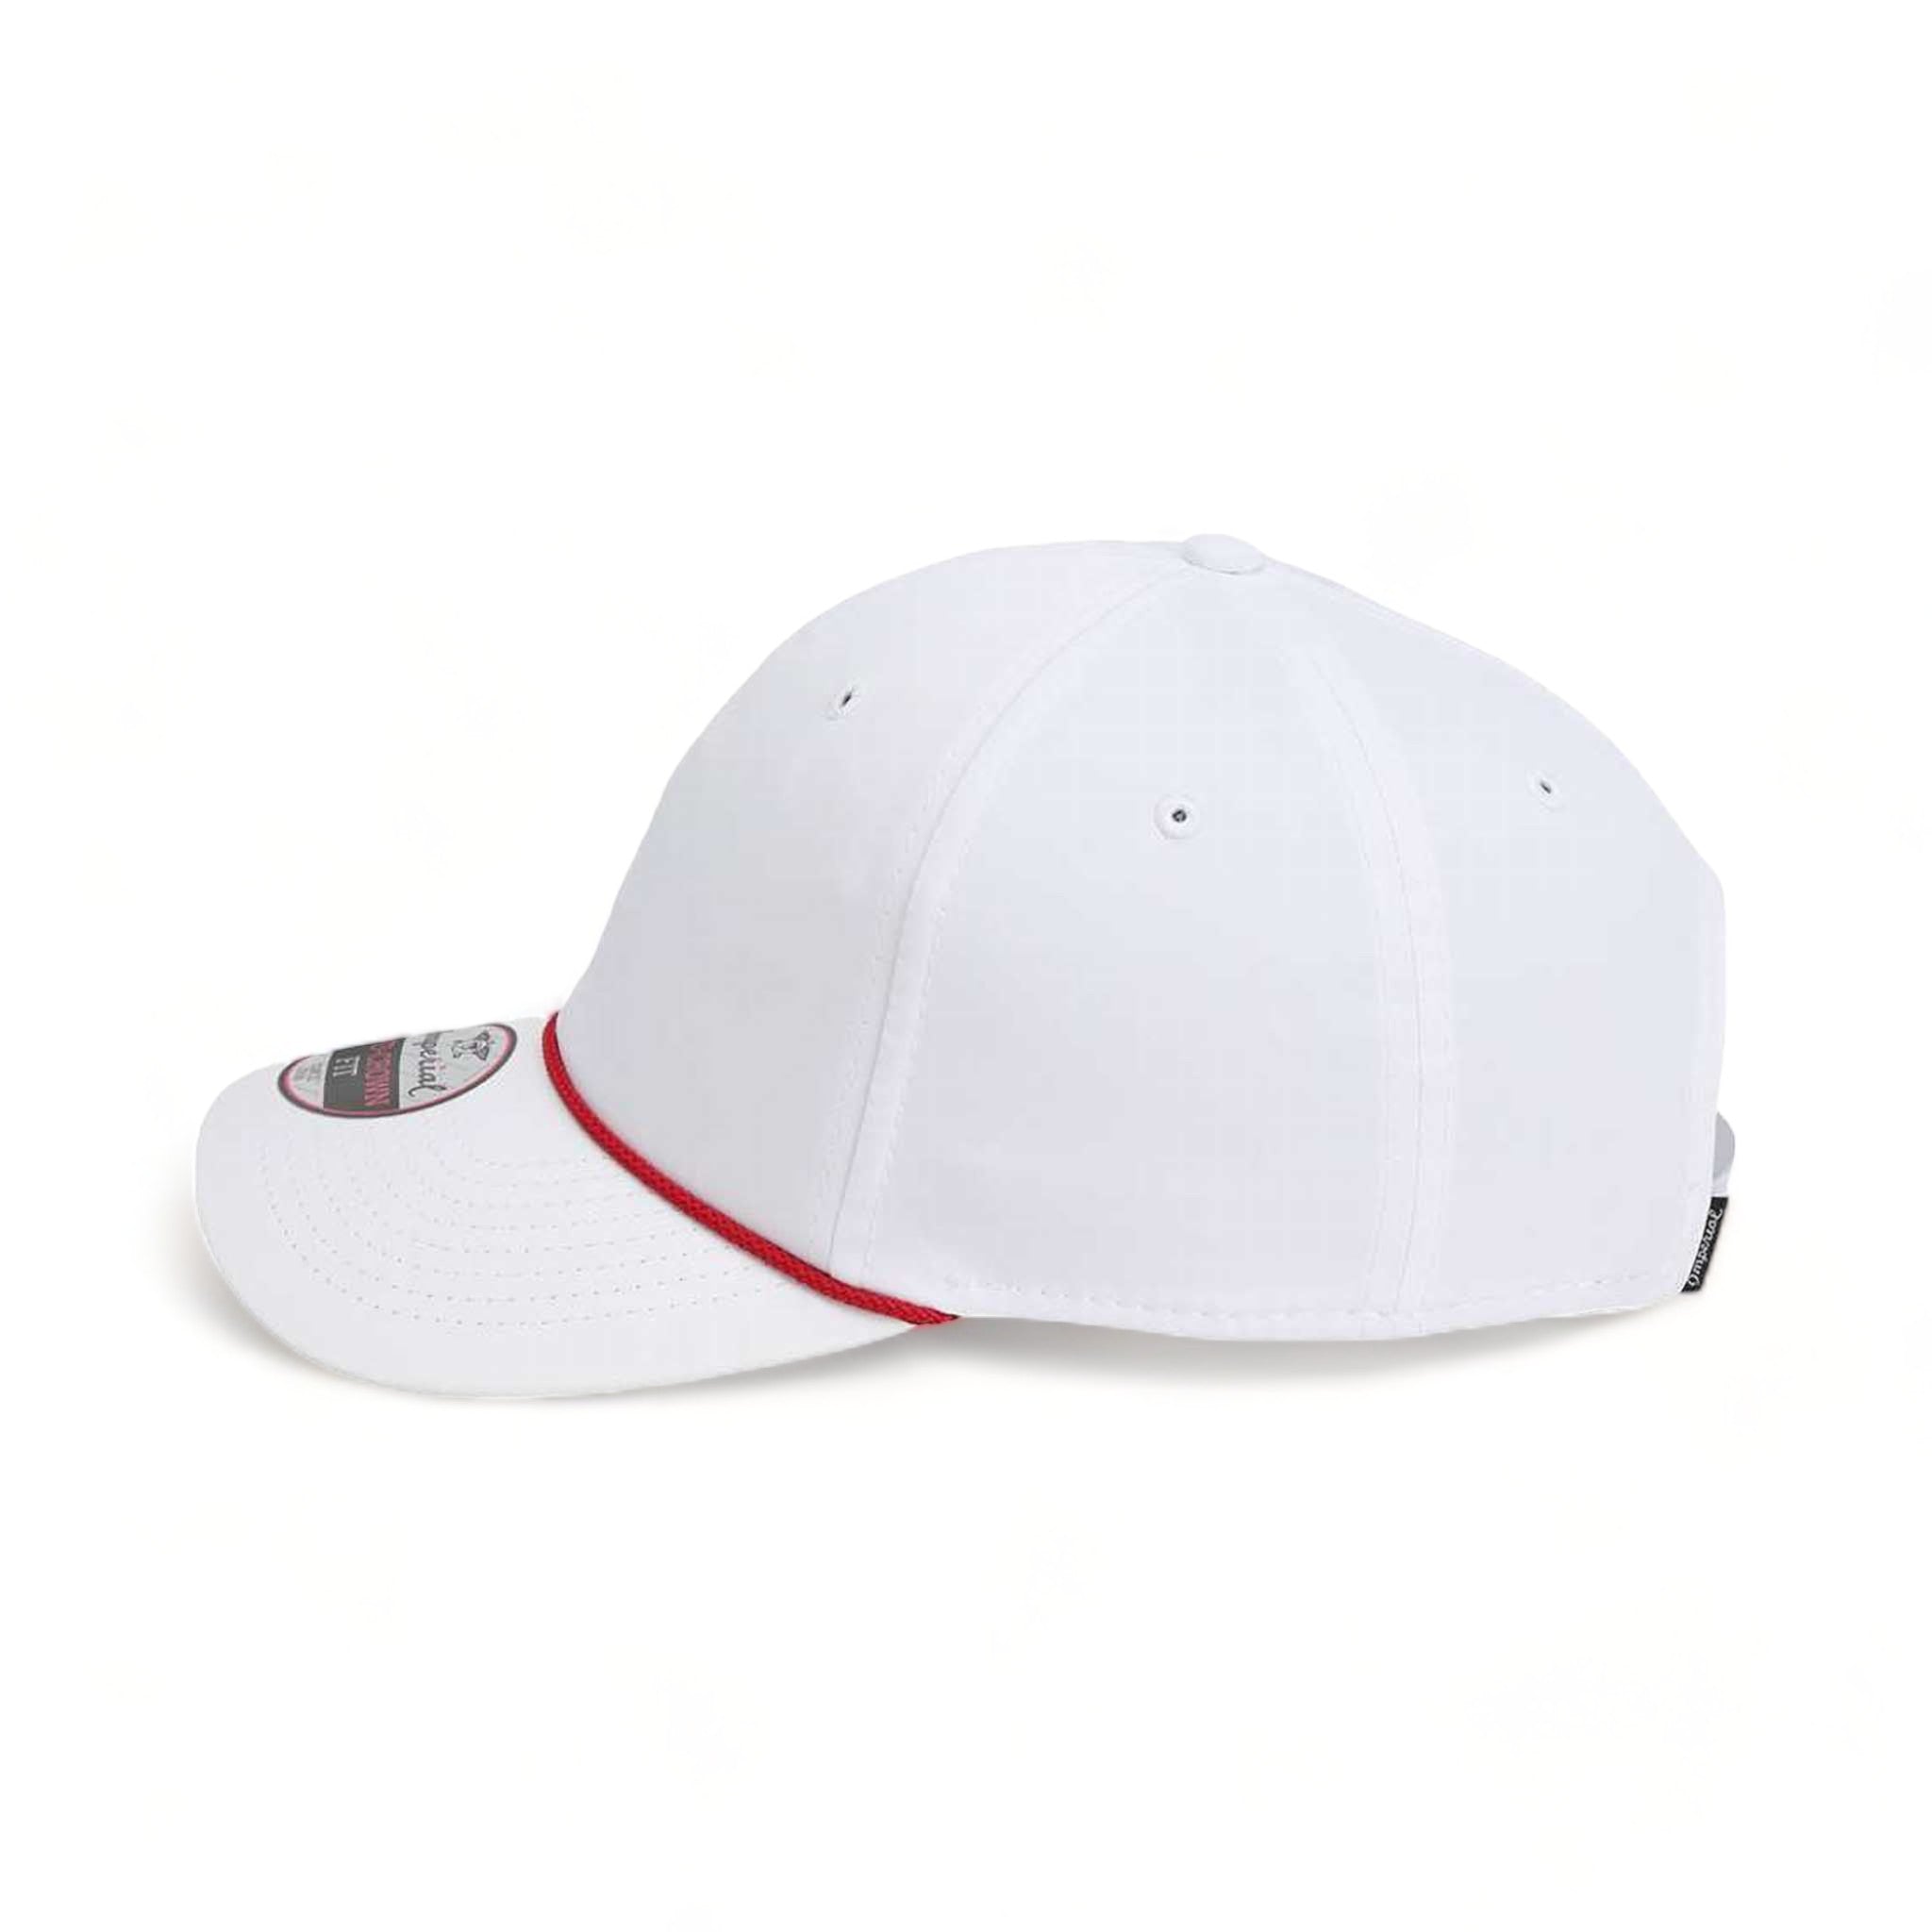 Side view of Imperial 7054 custom hat in white and red